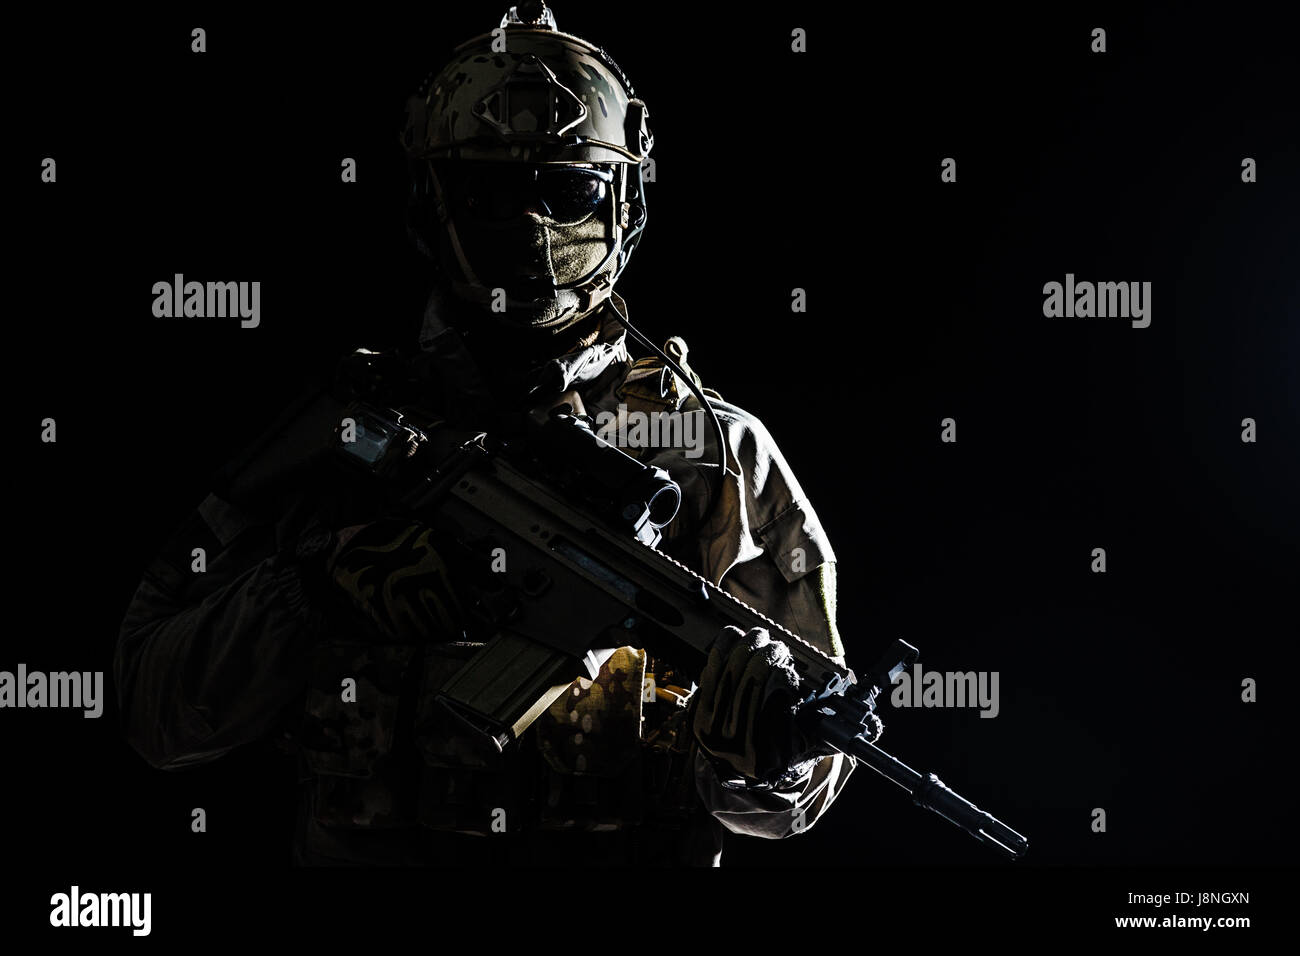 Army soldier of Special Operations Forces Stock Photo